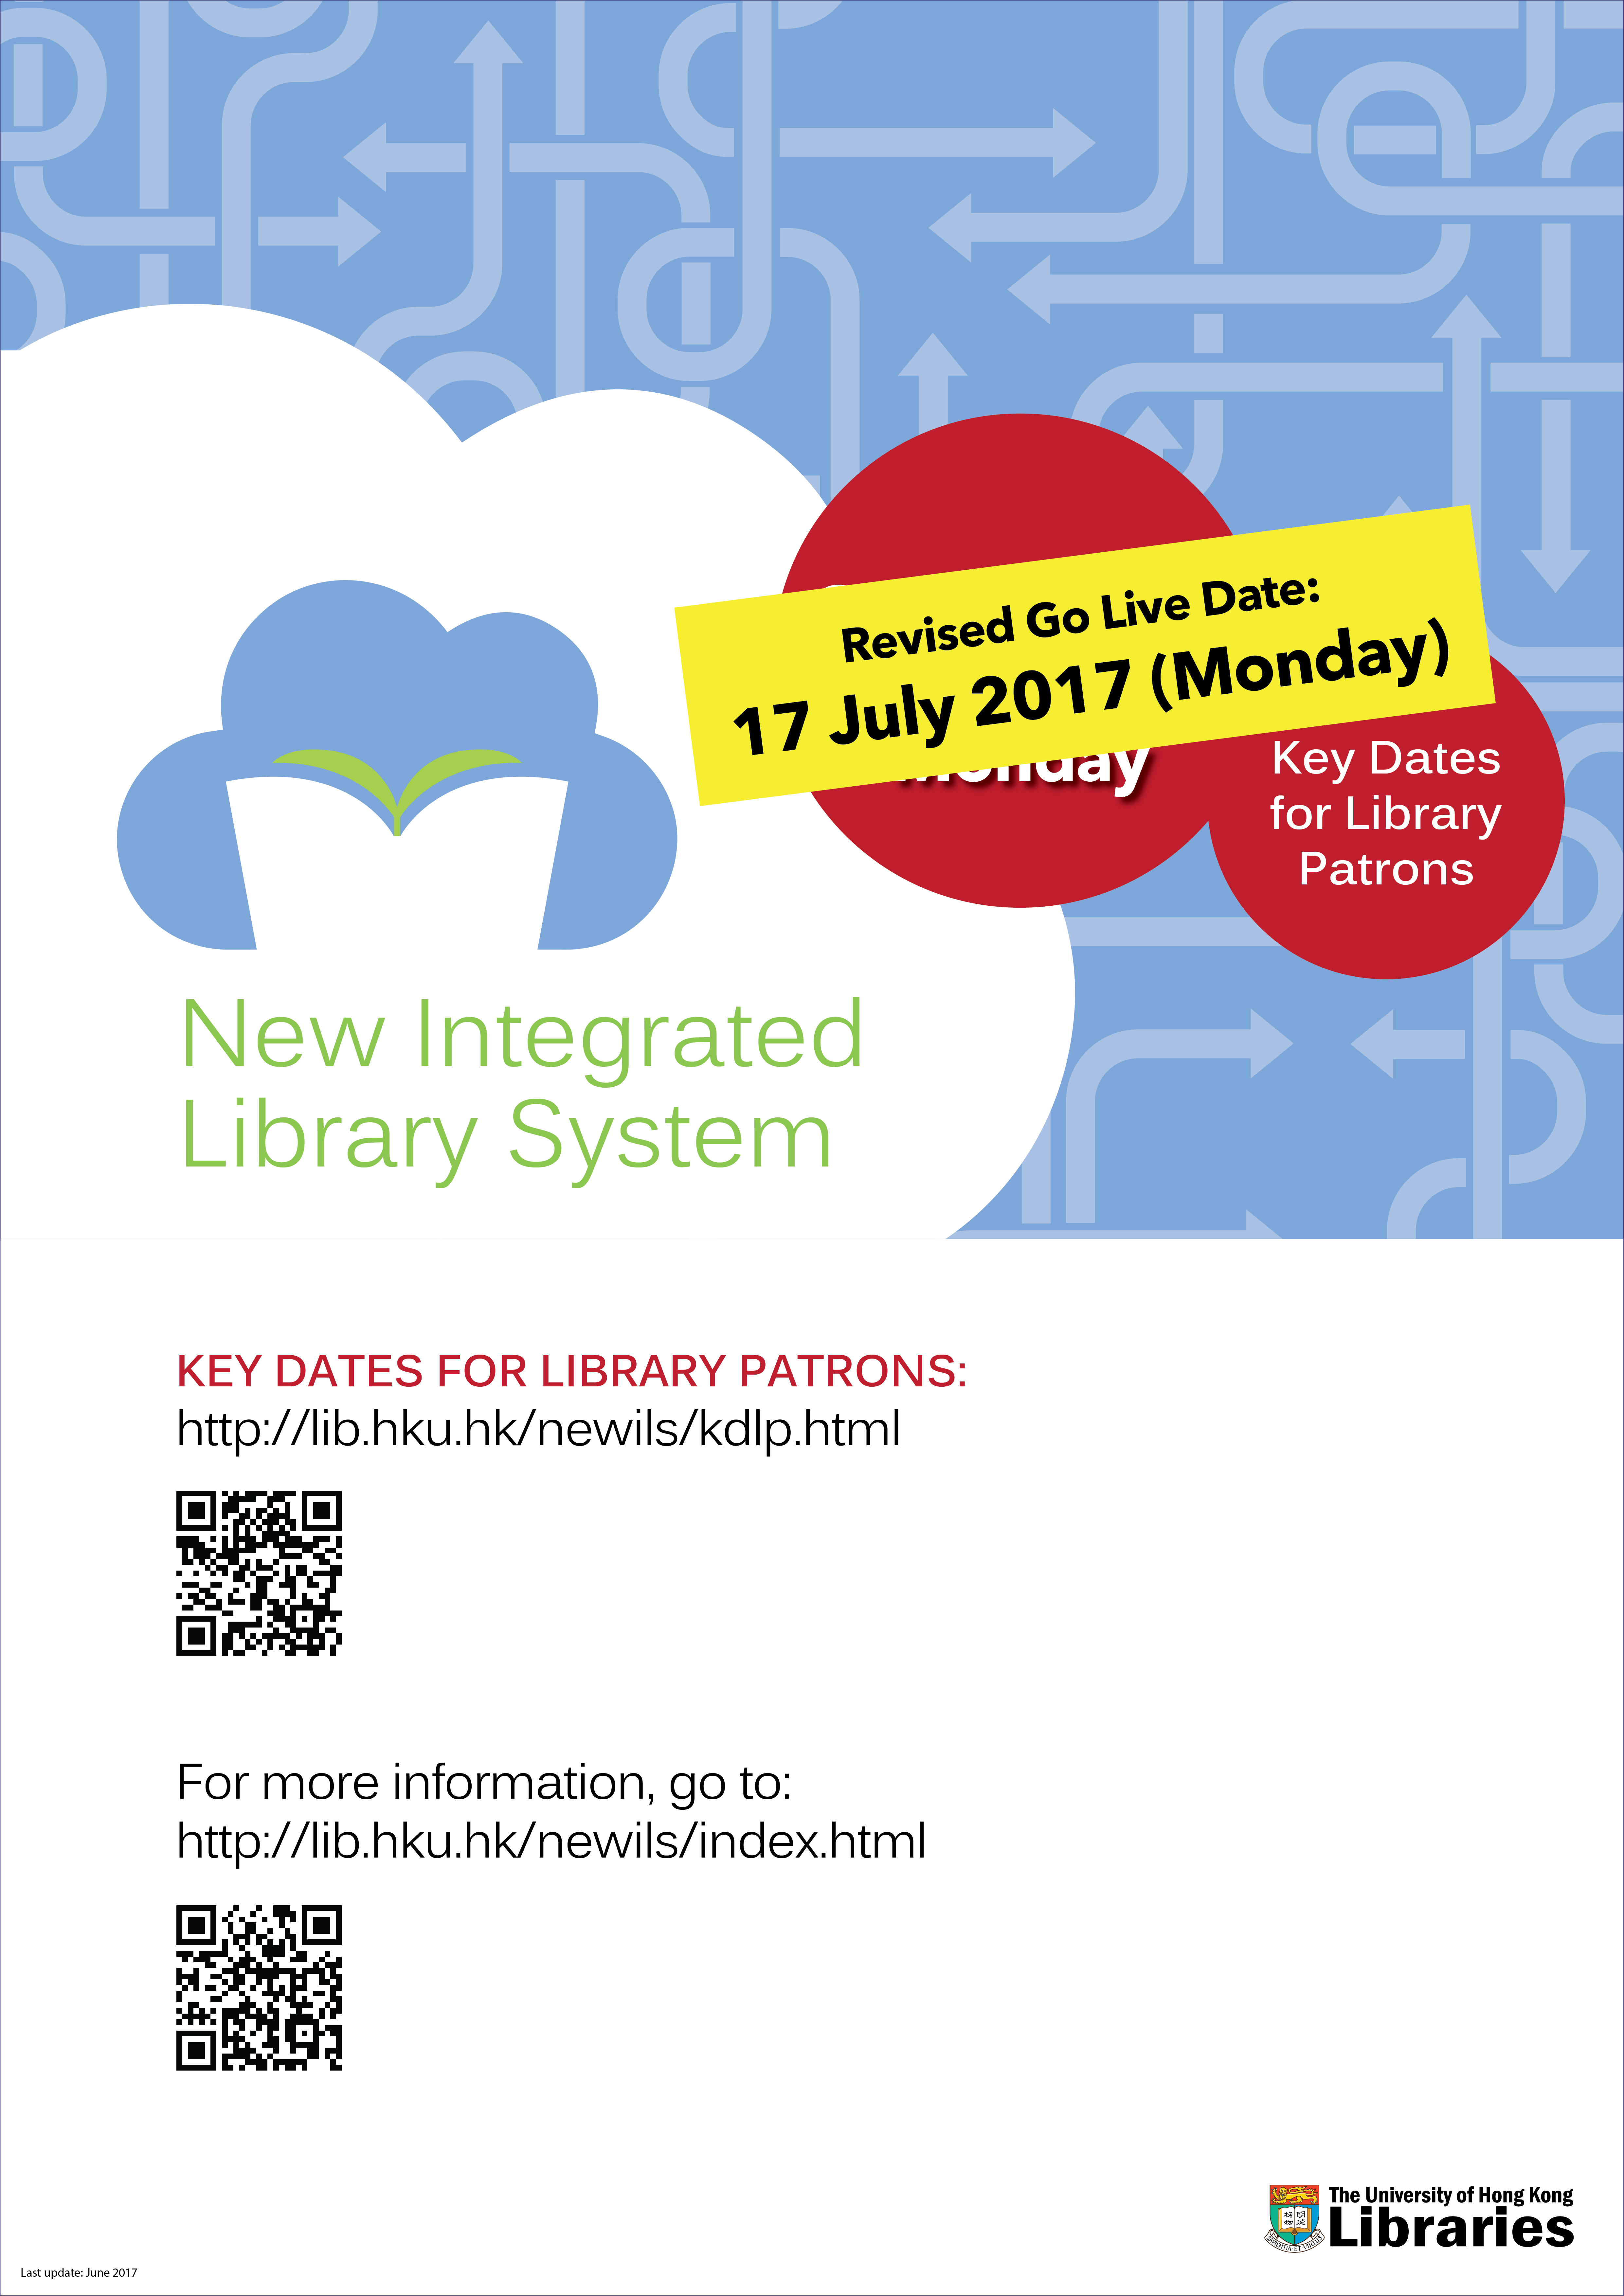 New Integrated Library System (ILS)